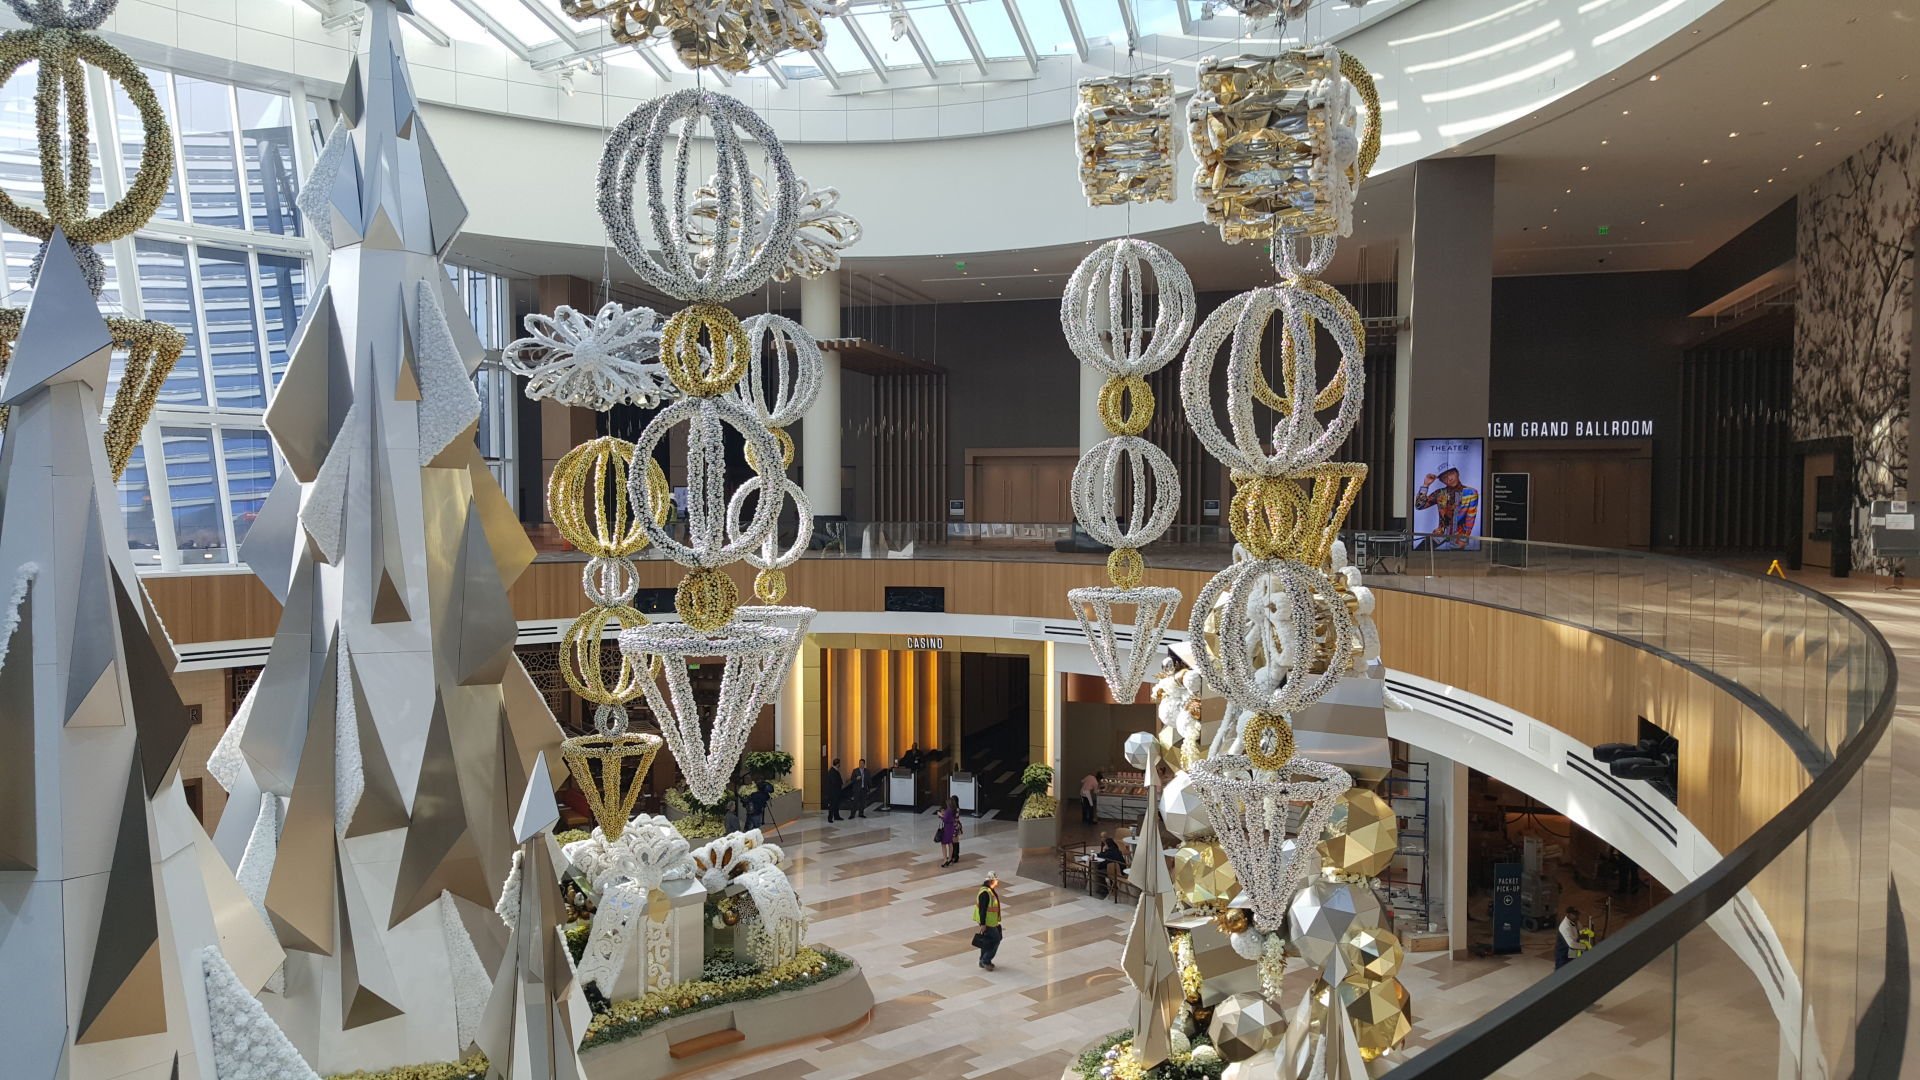 mgm national harbor casino holiday hours